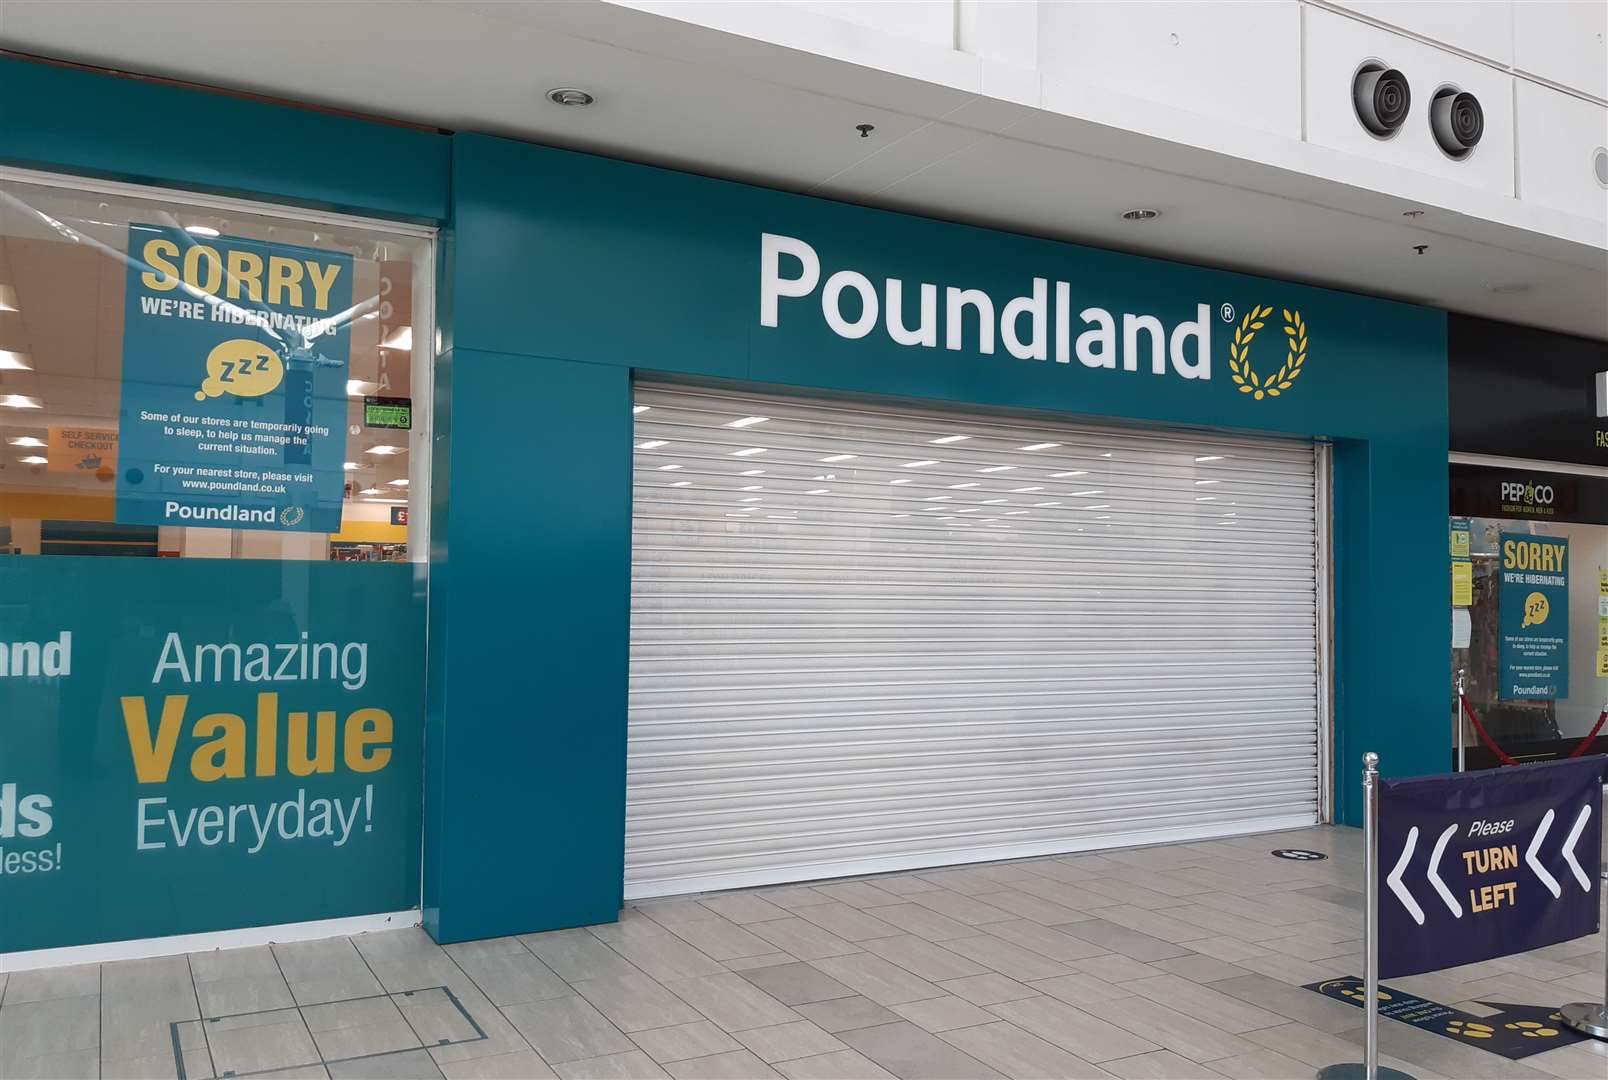 Cards Direct will open not far from Ashford's Poundland, which has been closed since August